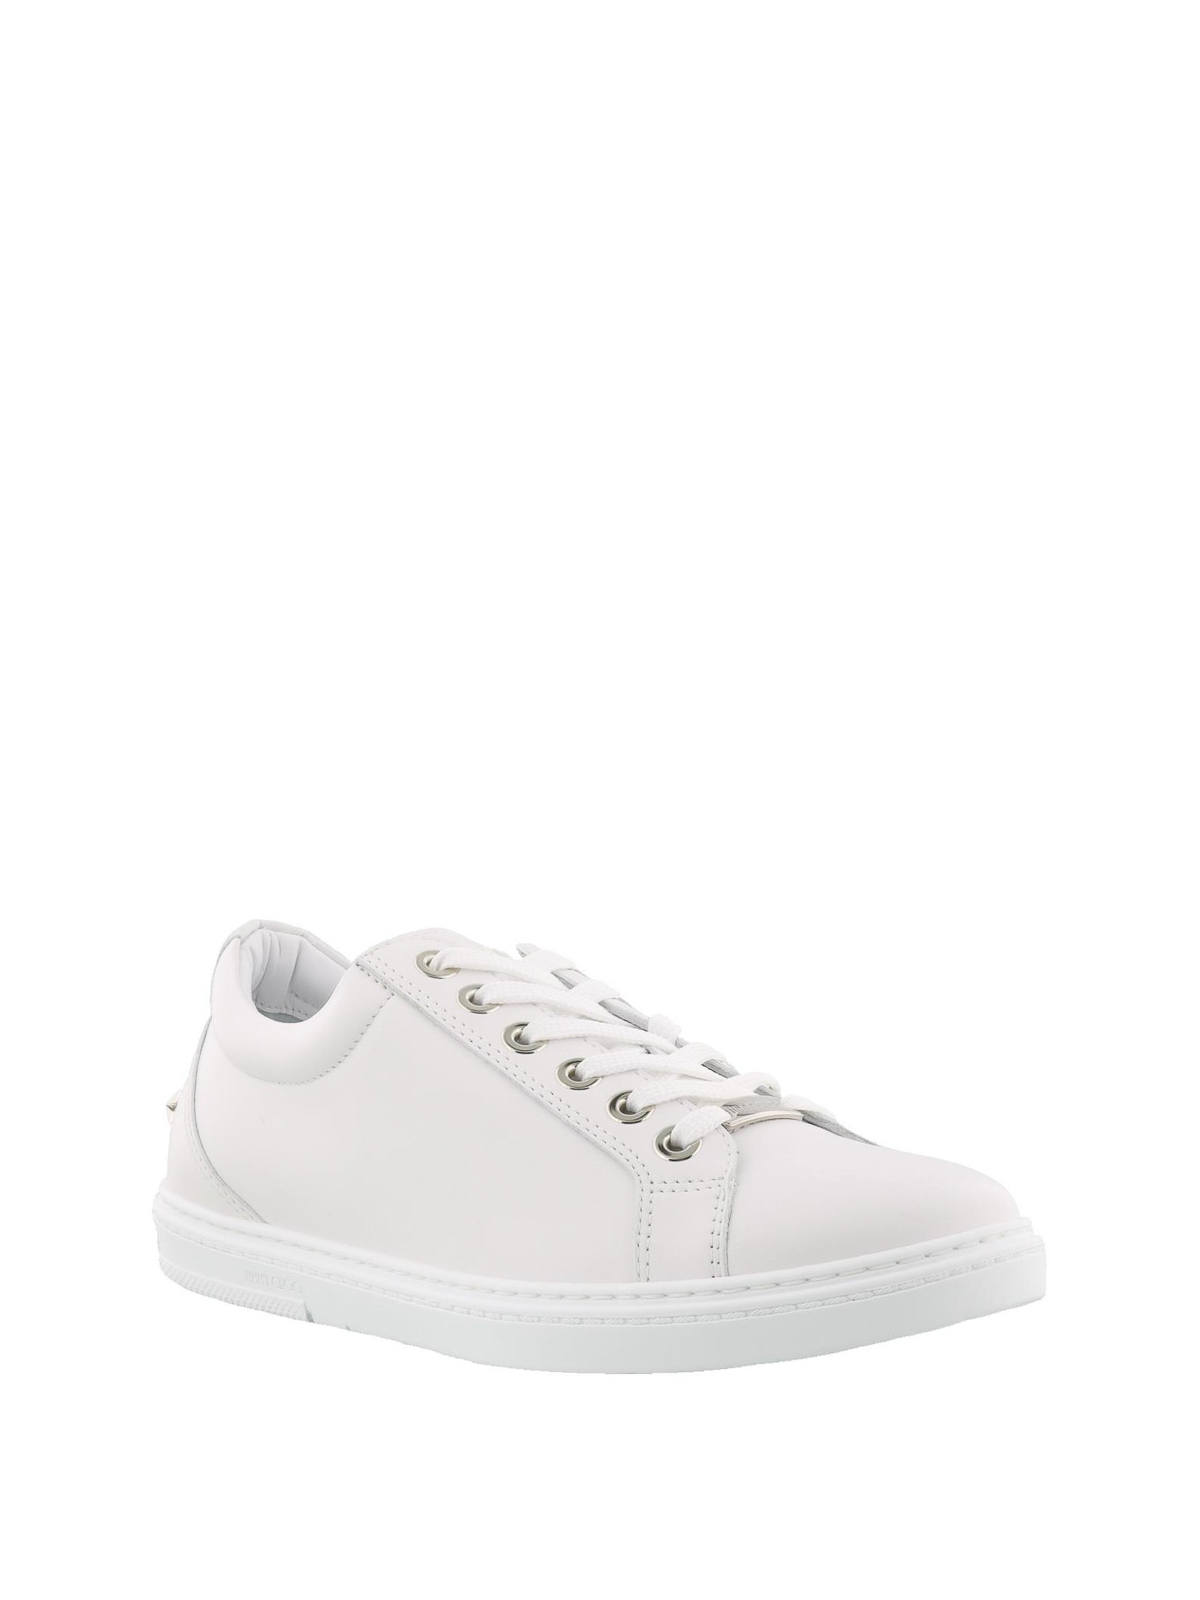 Jimmy Cash total leather sneakers - CASHSLYWHITE